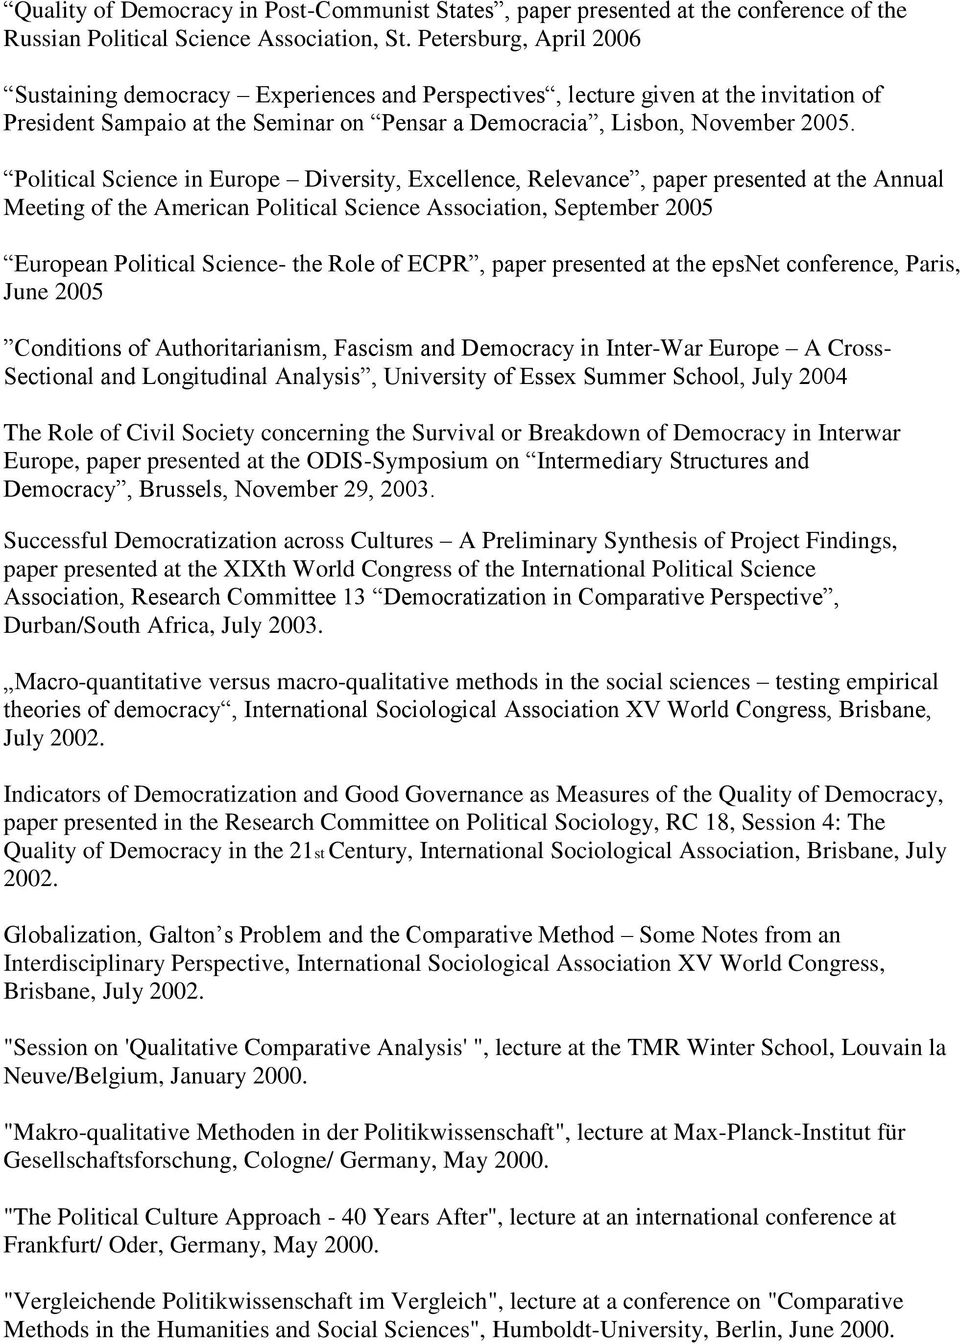 Political Science in Europe Diversity, Excellence, Relevance, paper presented at the Annual Meeting of the American Political Science Association, September 2005 European Political Science- the Role